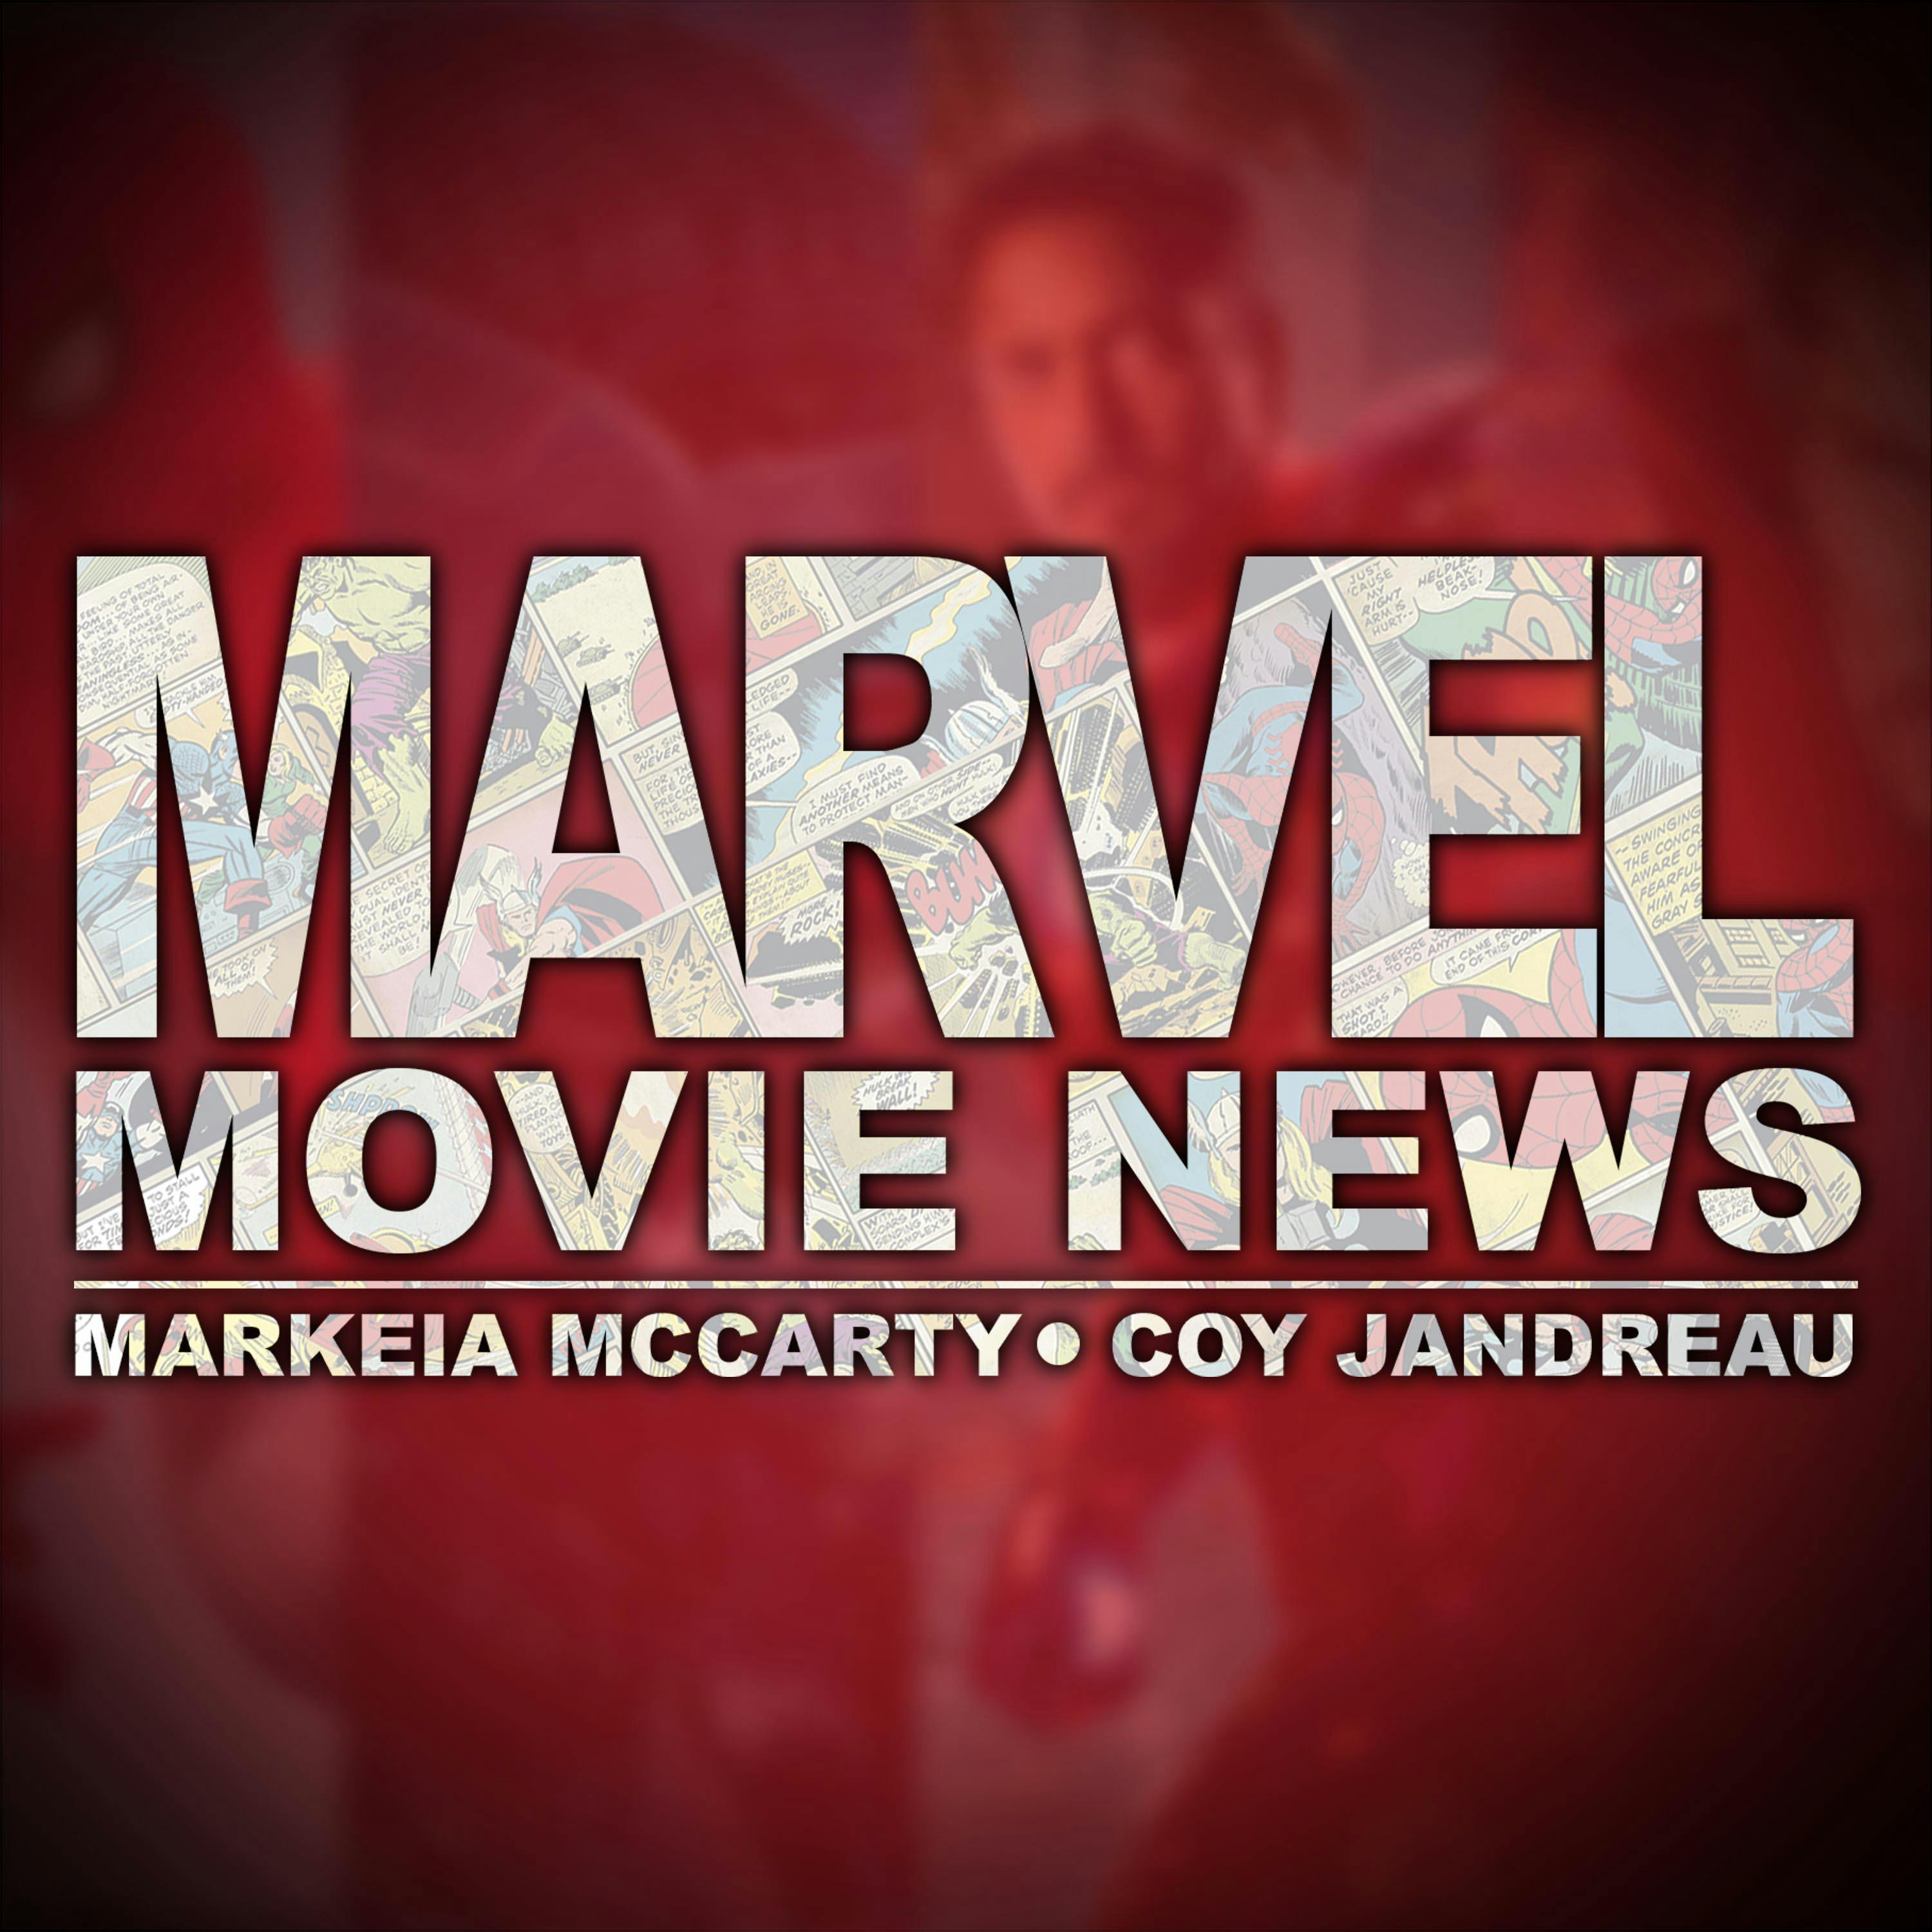 Early Runaways Reviews, The Wasp, Avengers Updates & More | Marvel Movie News Ep 145